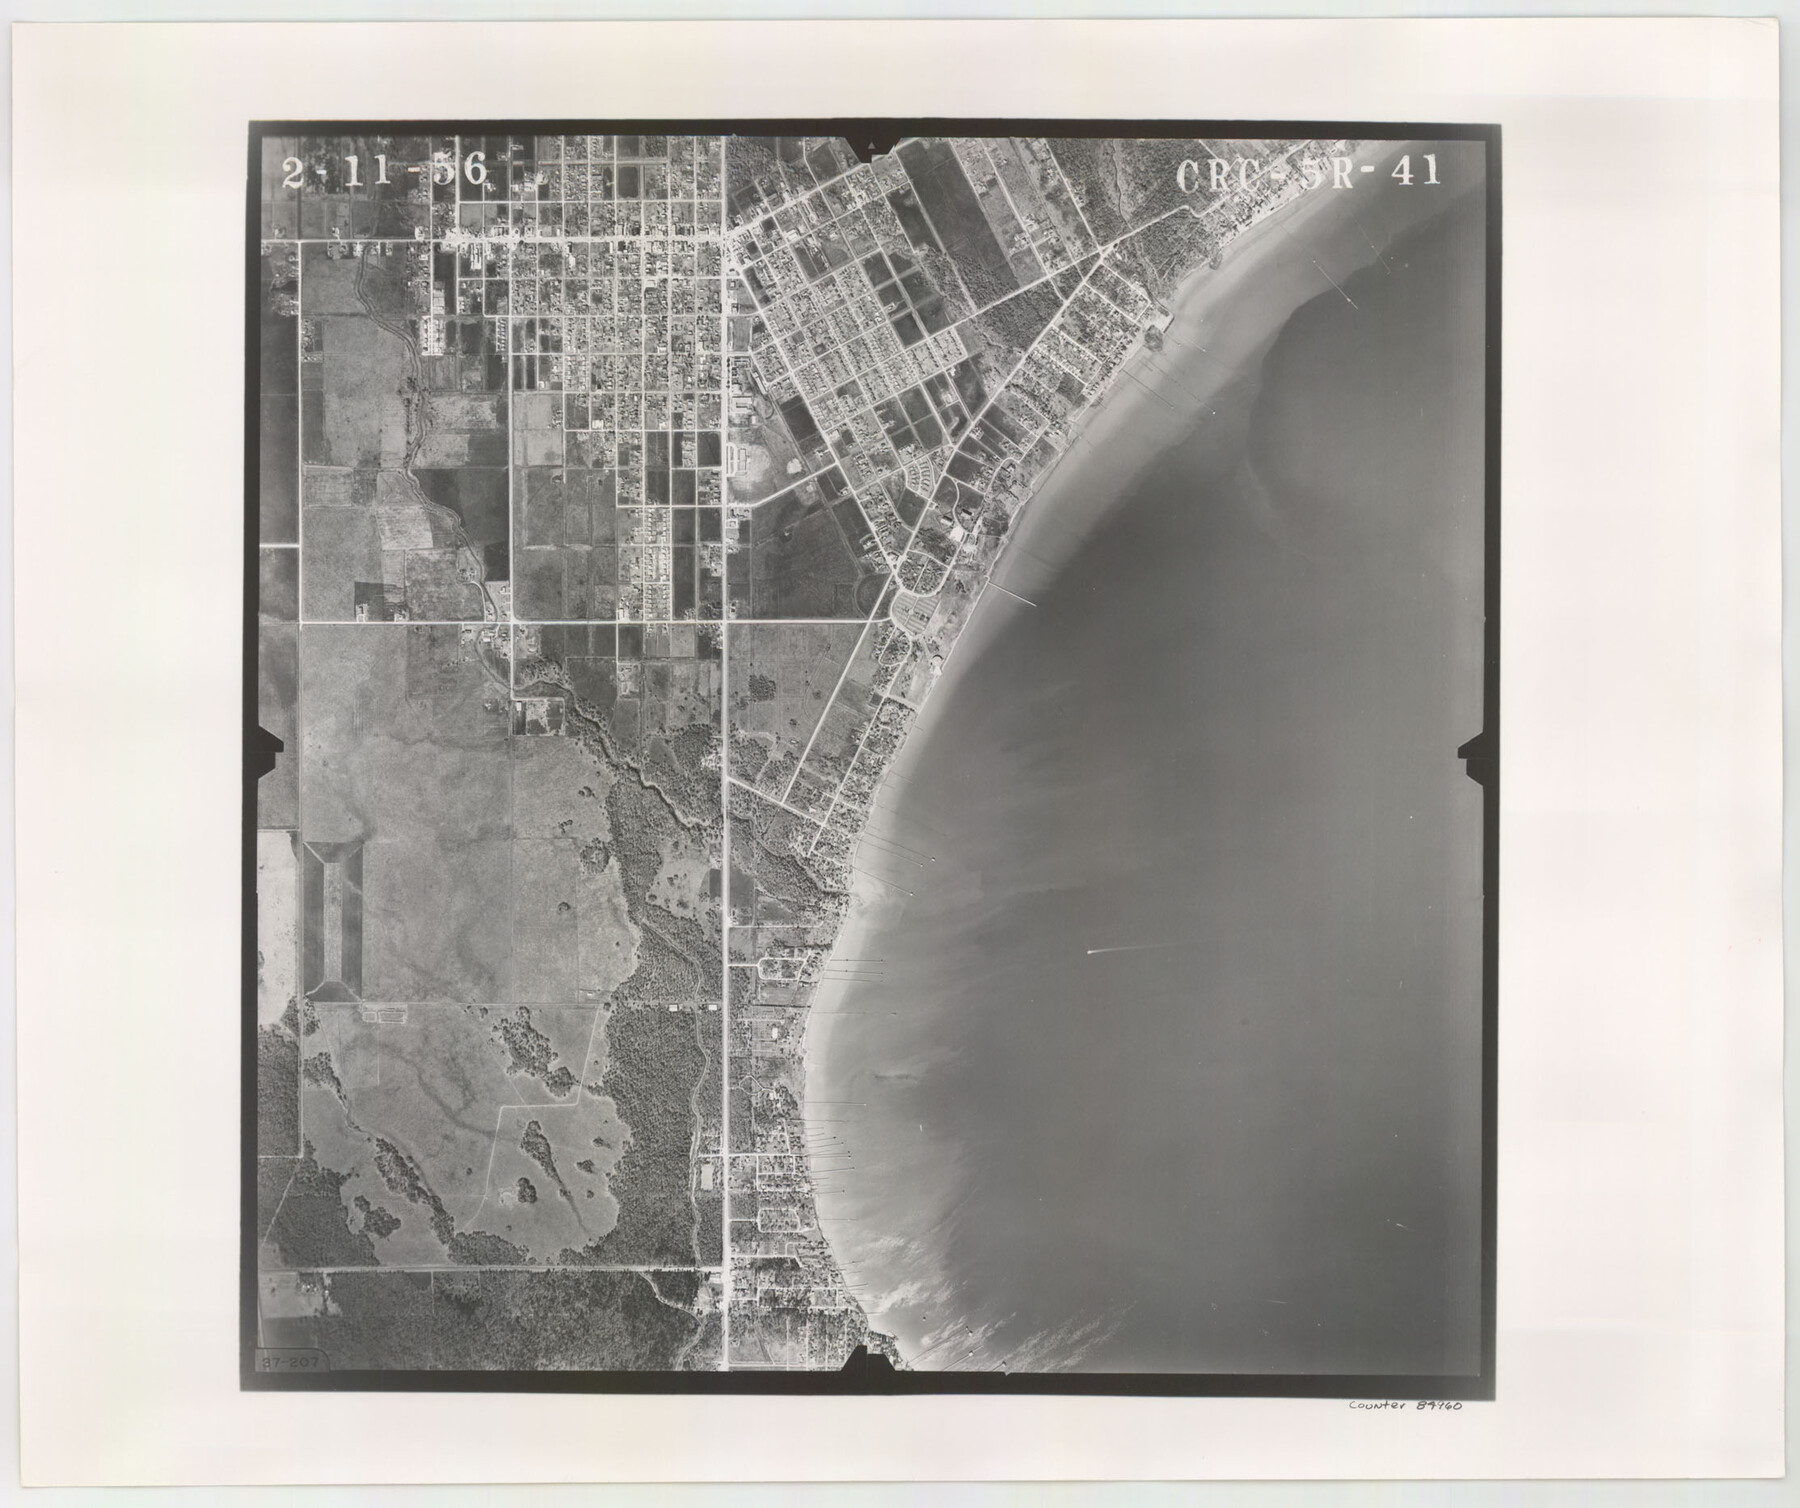 84960, Flight Mission No. CRC-5R, Frame 41, Chambers County, General Map Collection